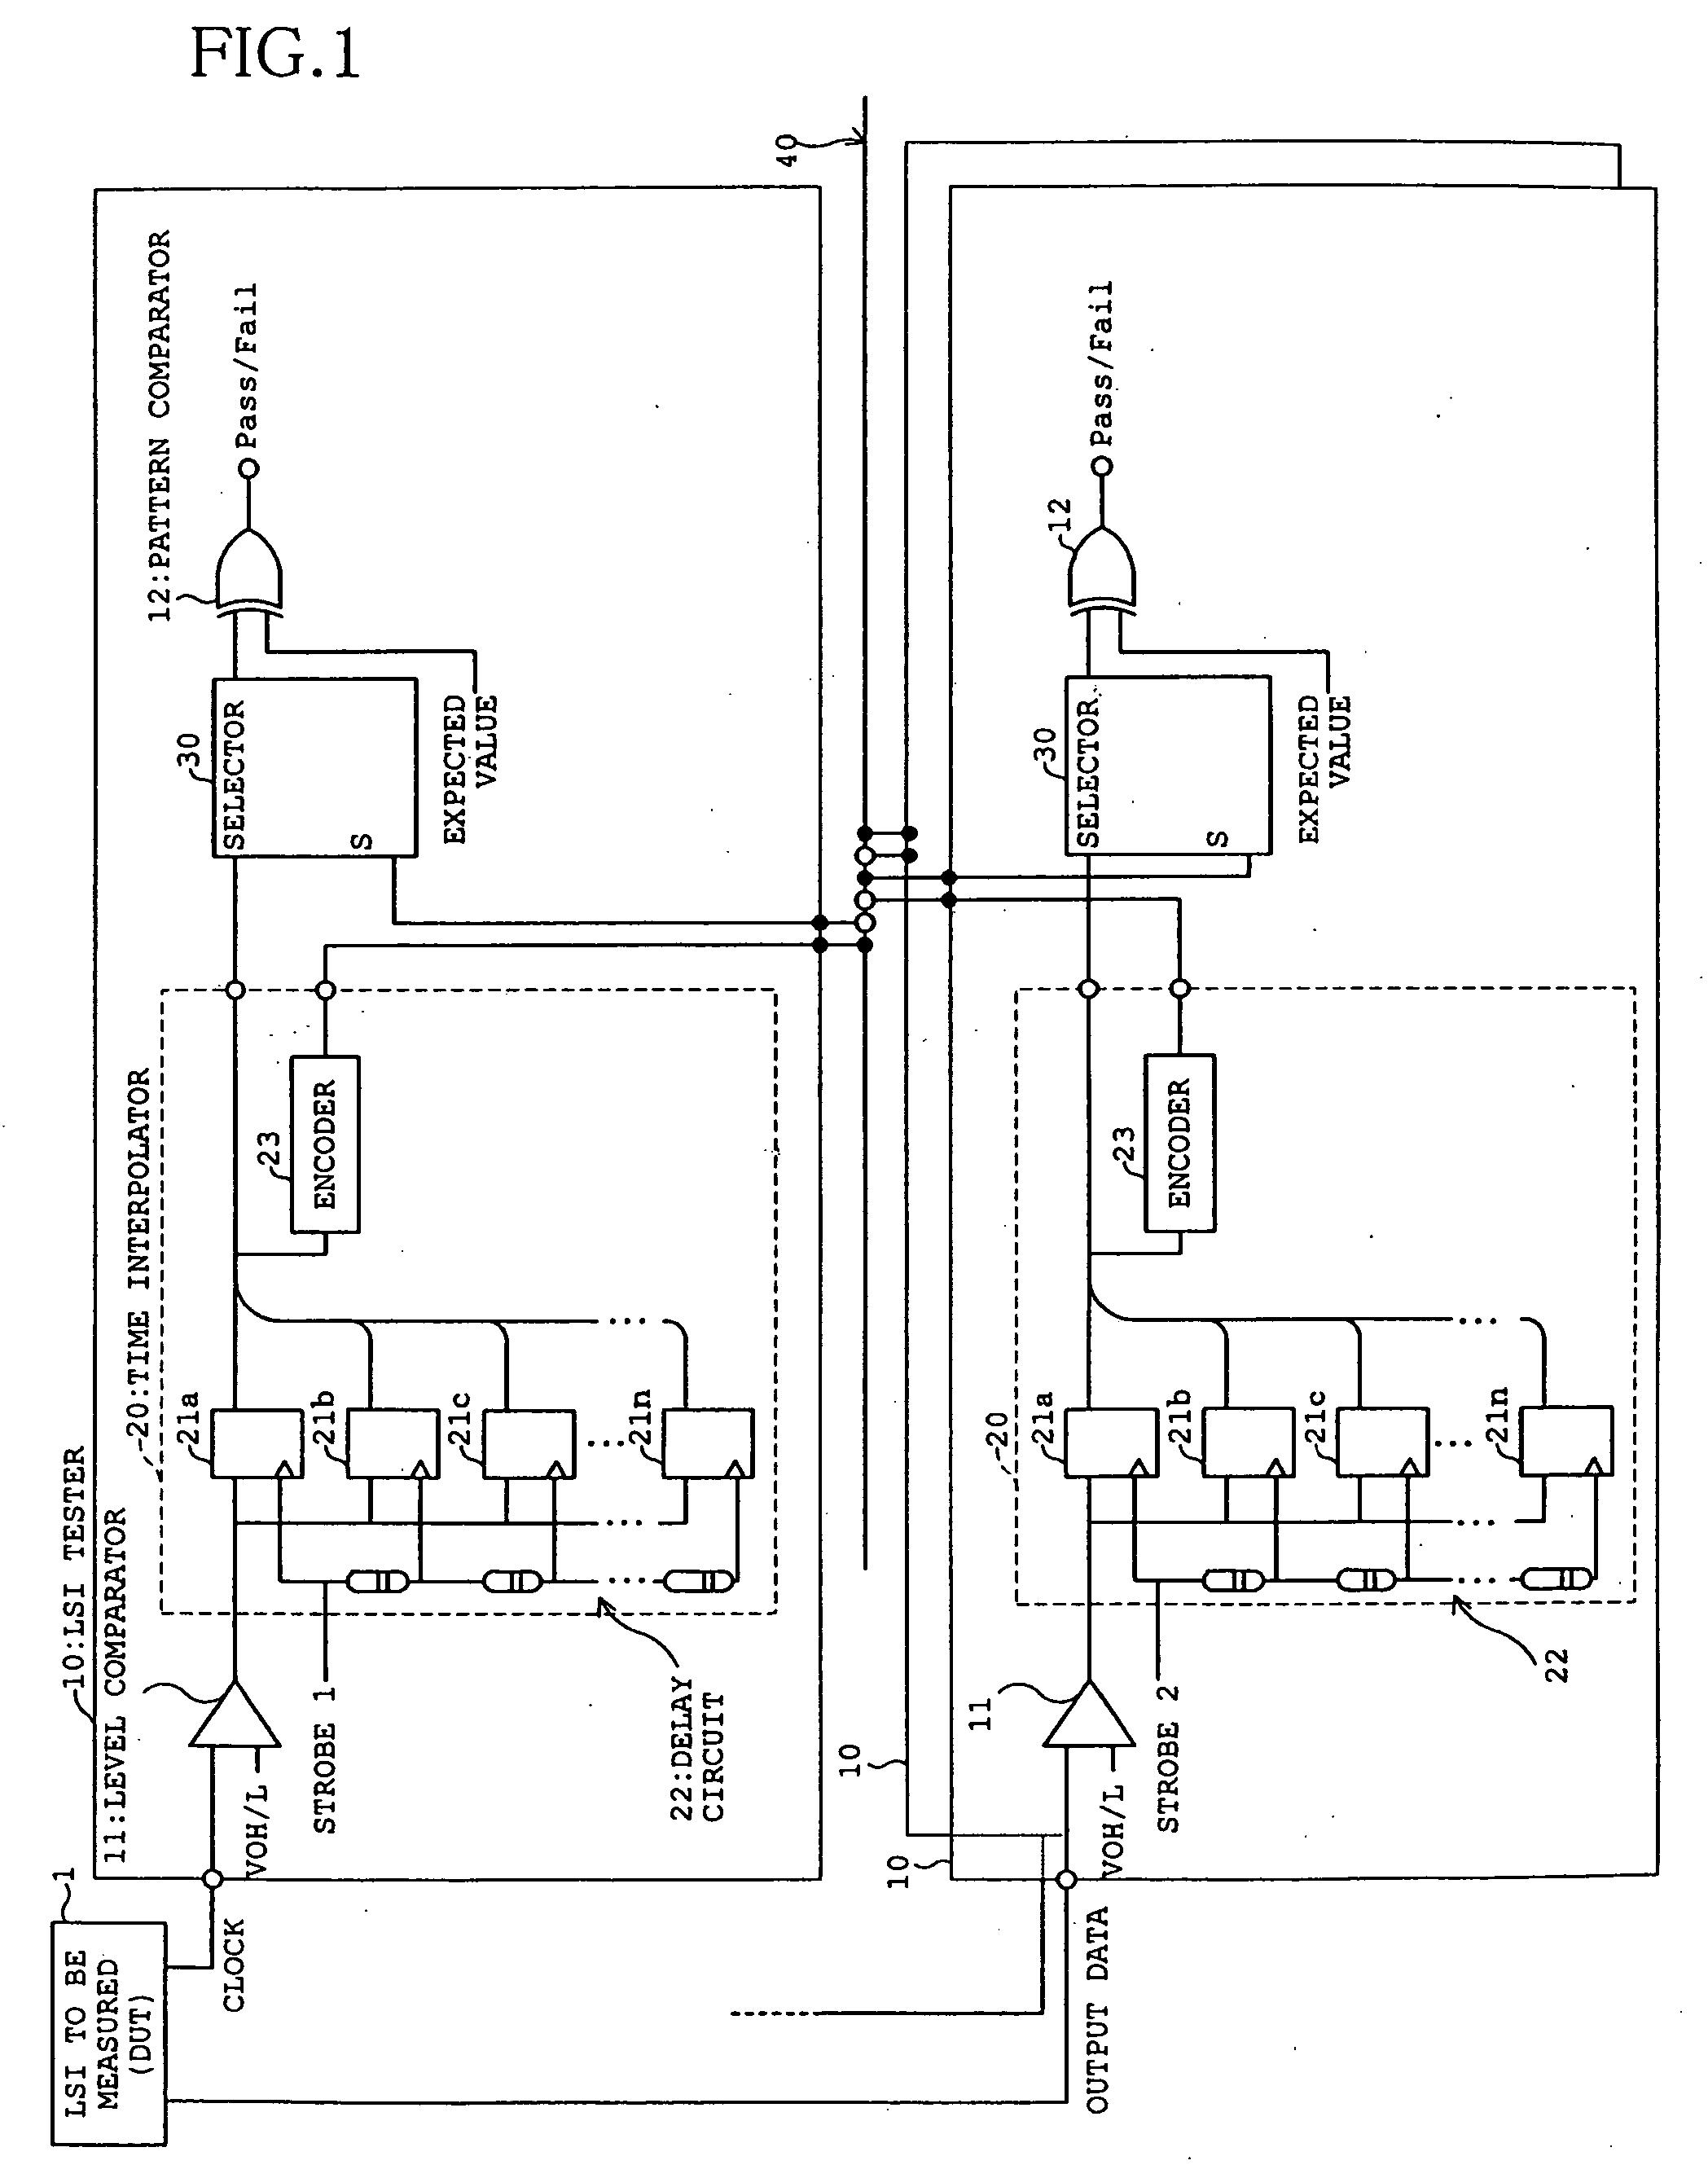 Device for testing lsi to be measured, jitter analyzer, and phase difference detector